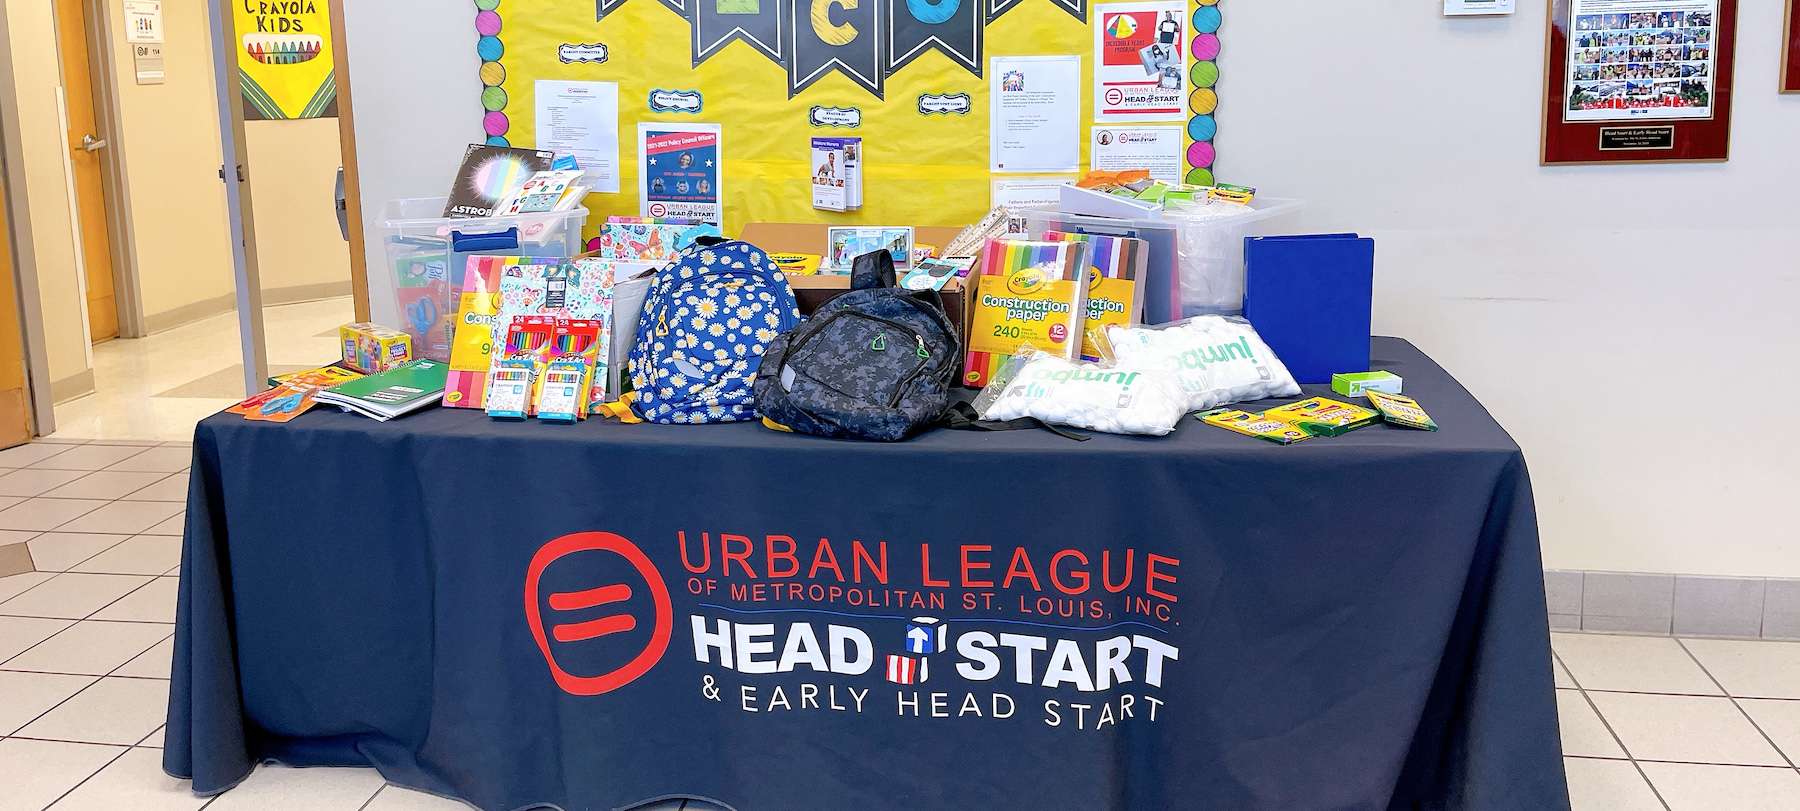 Table full of donations for Urban League head start programs